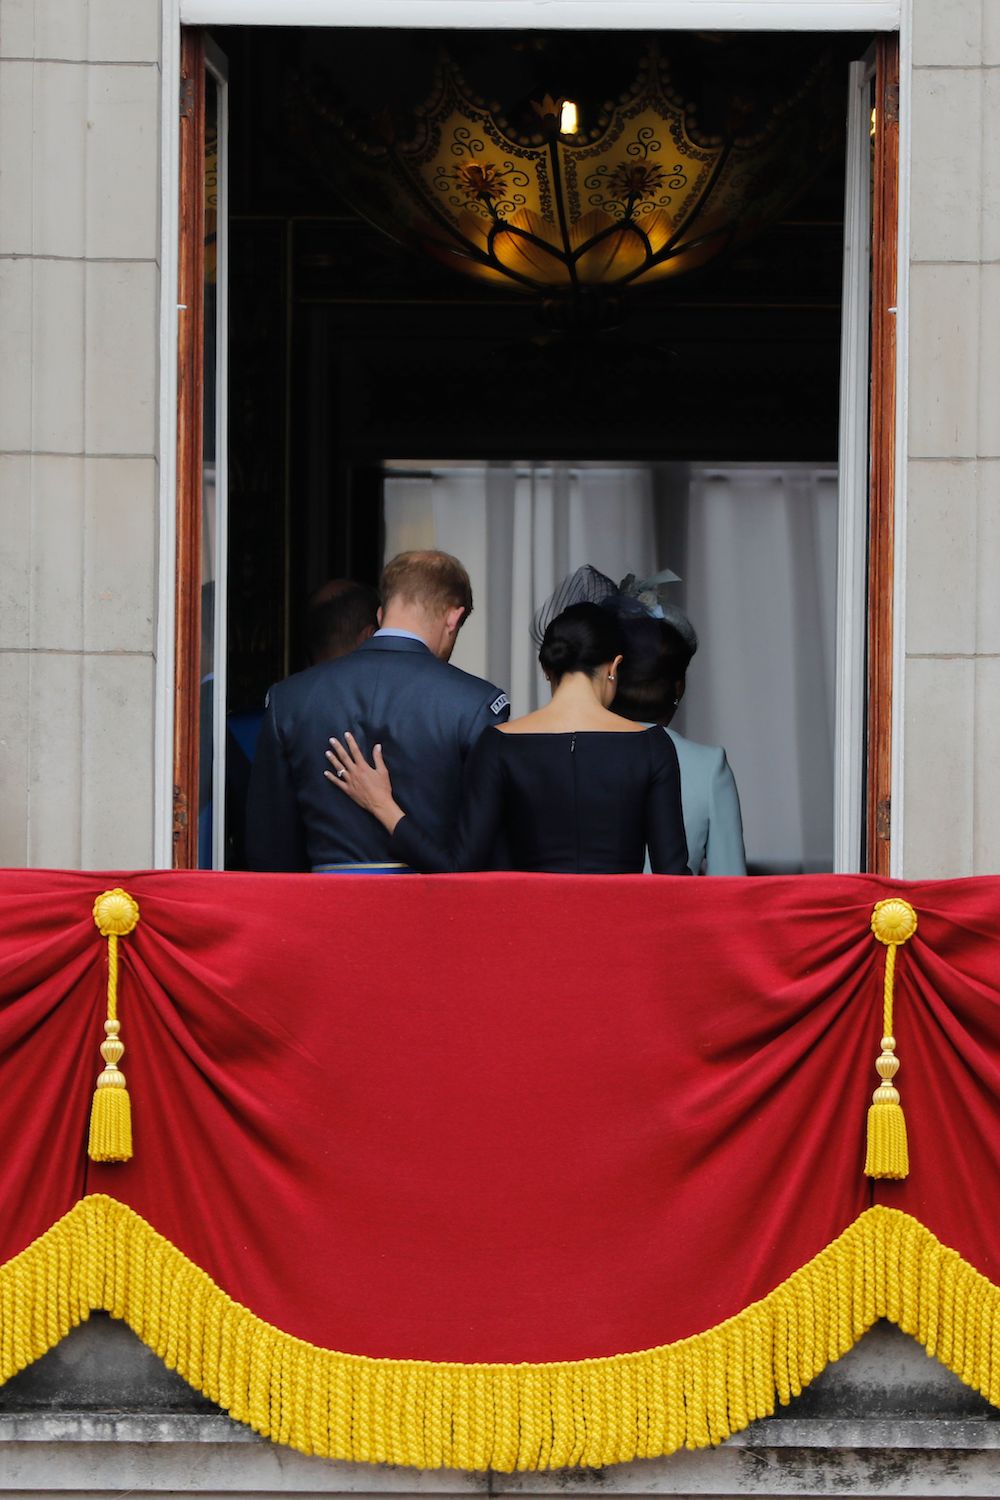 Meghan Markle puts her hand on Prince Harry's back as they leave the balcony of Buckingham Palace